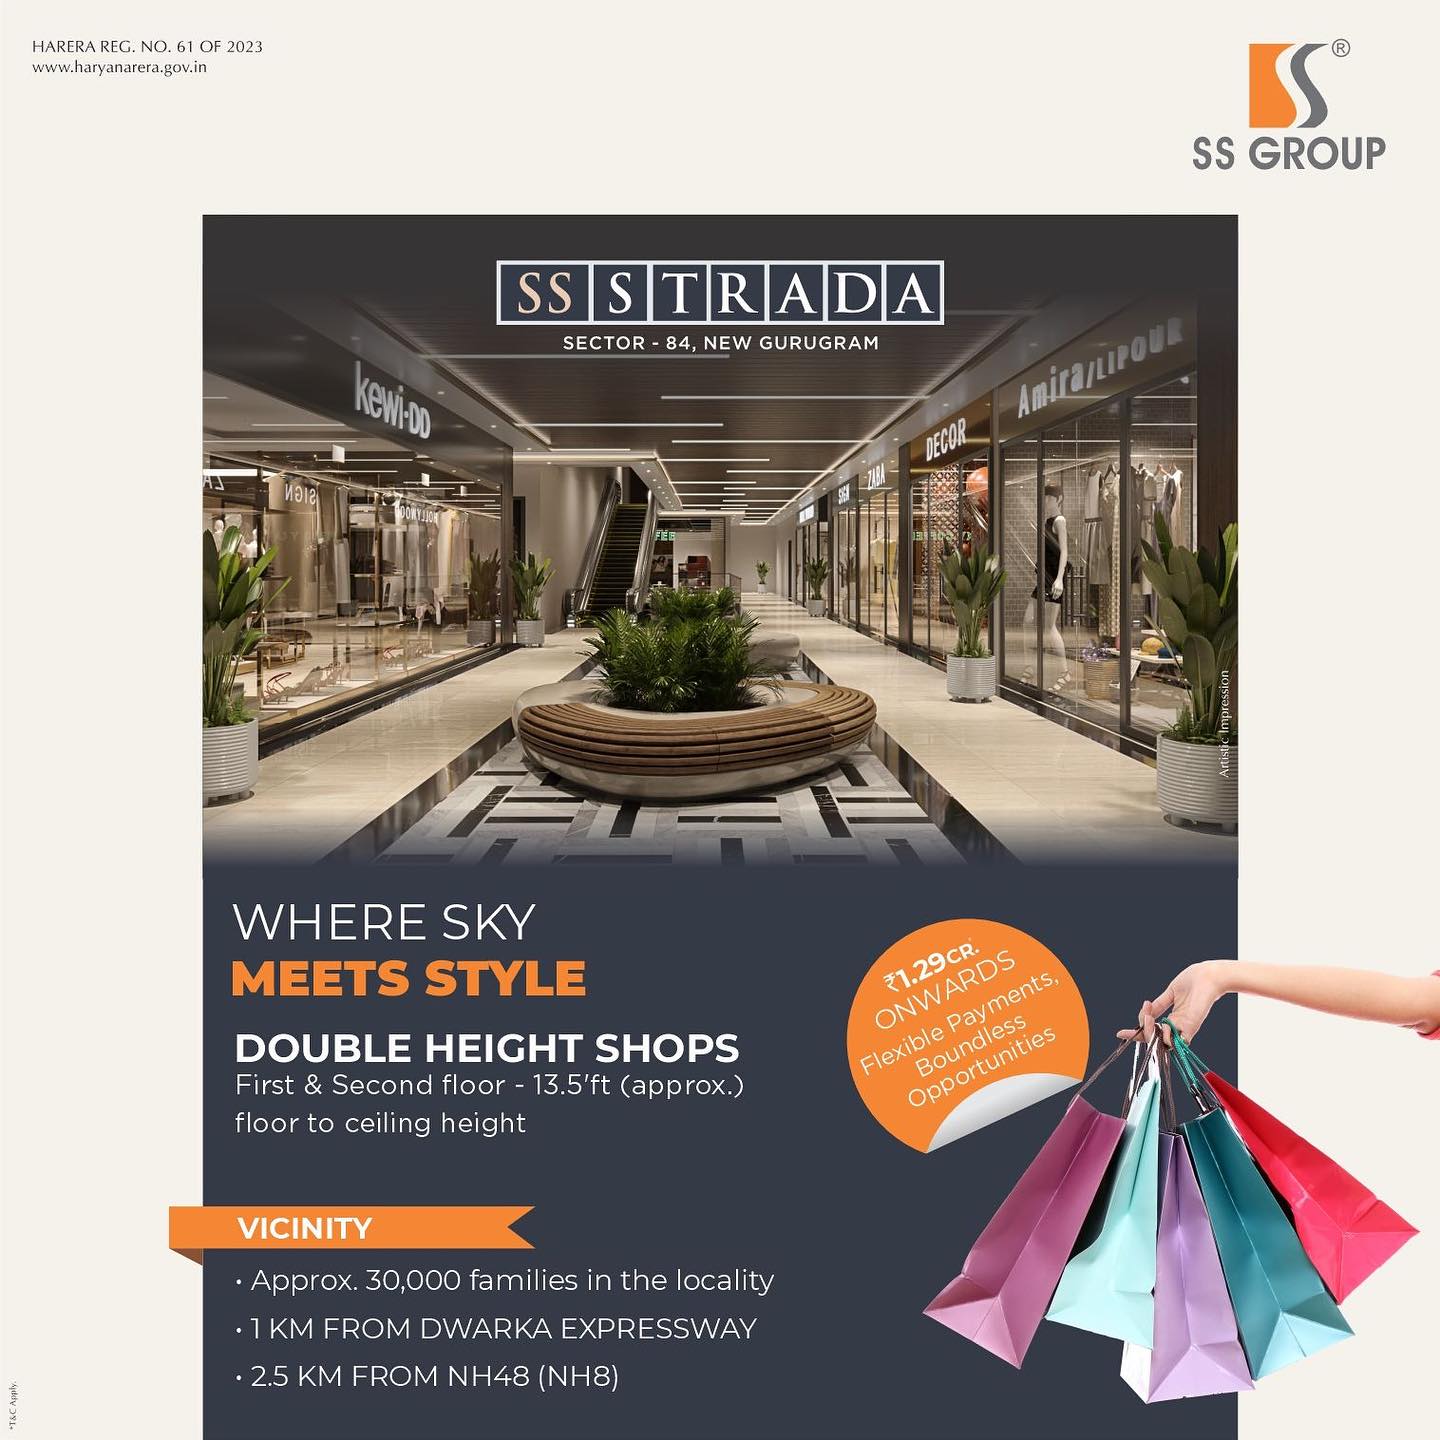 Investment starting from Rs 1.29 Cr onwards at SS Strada in Sector 84, Gurgaon Update